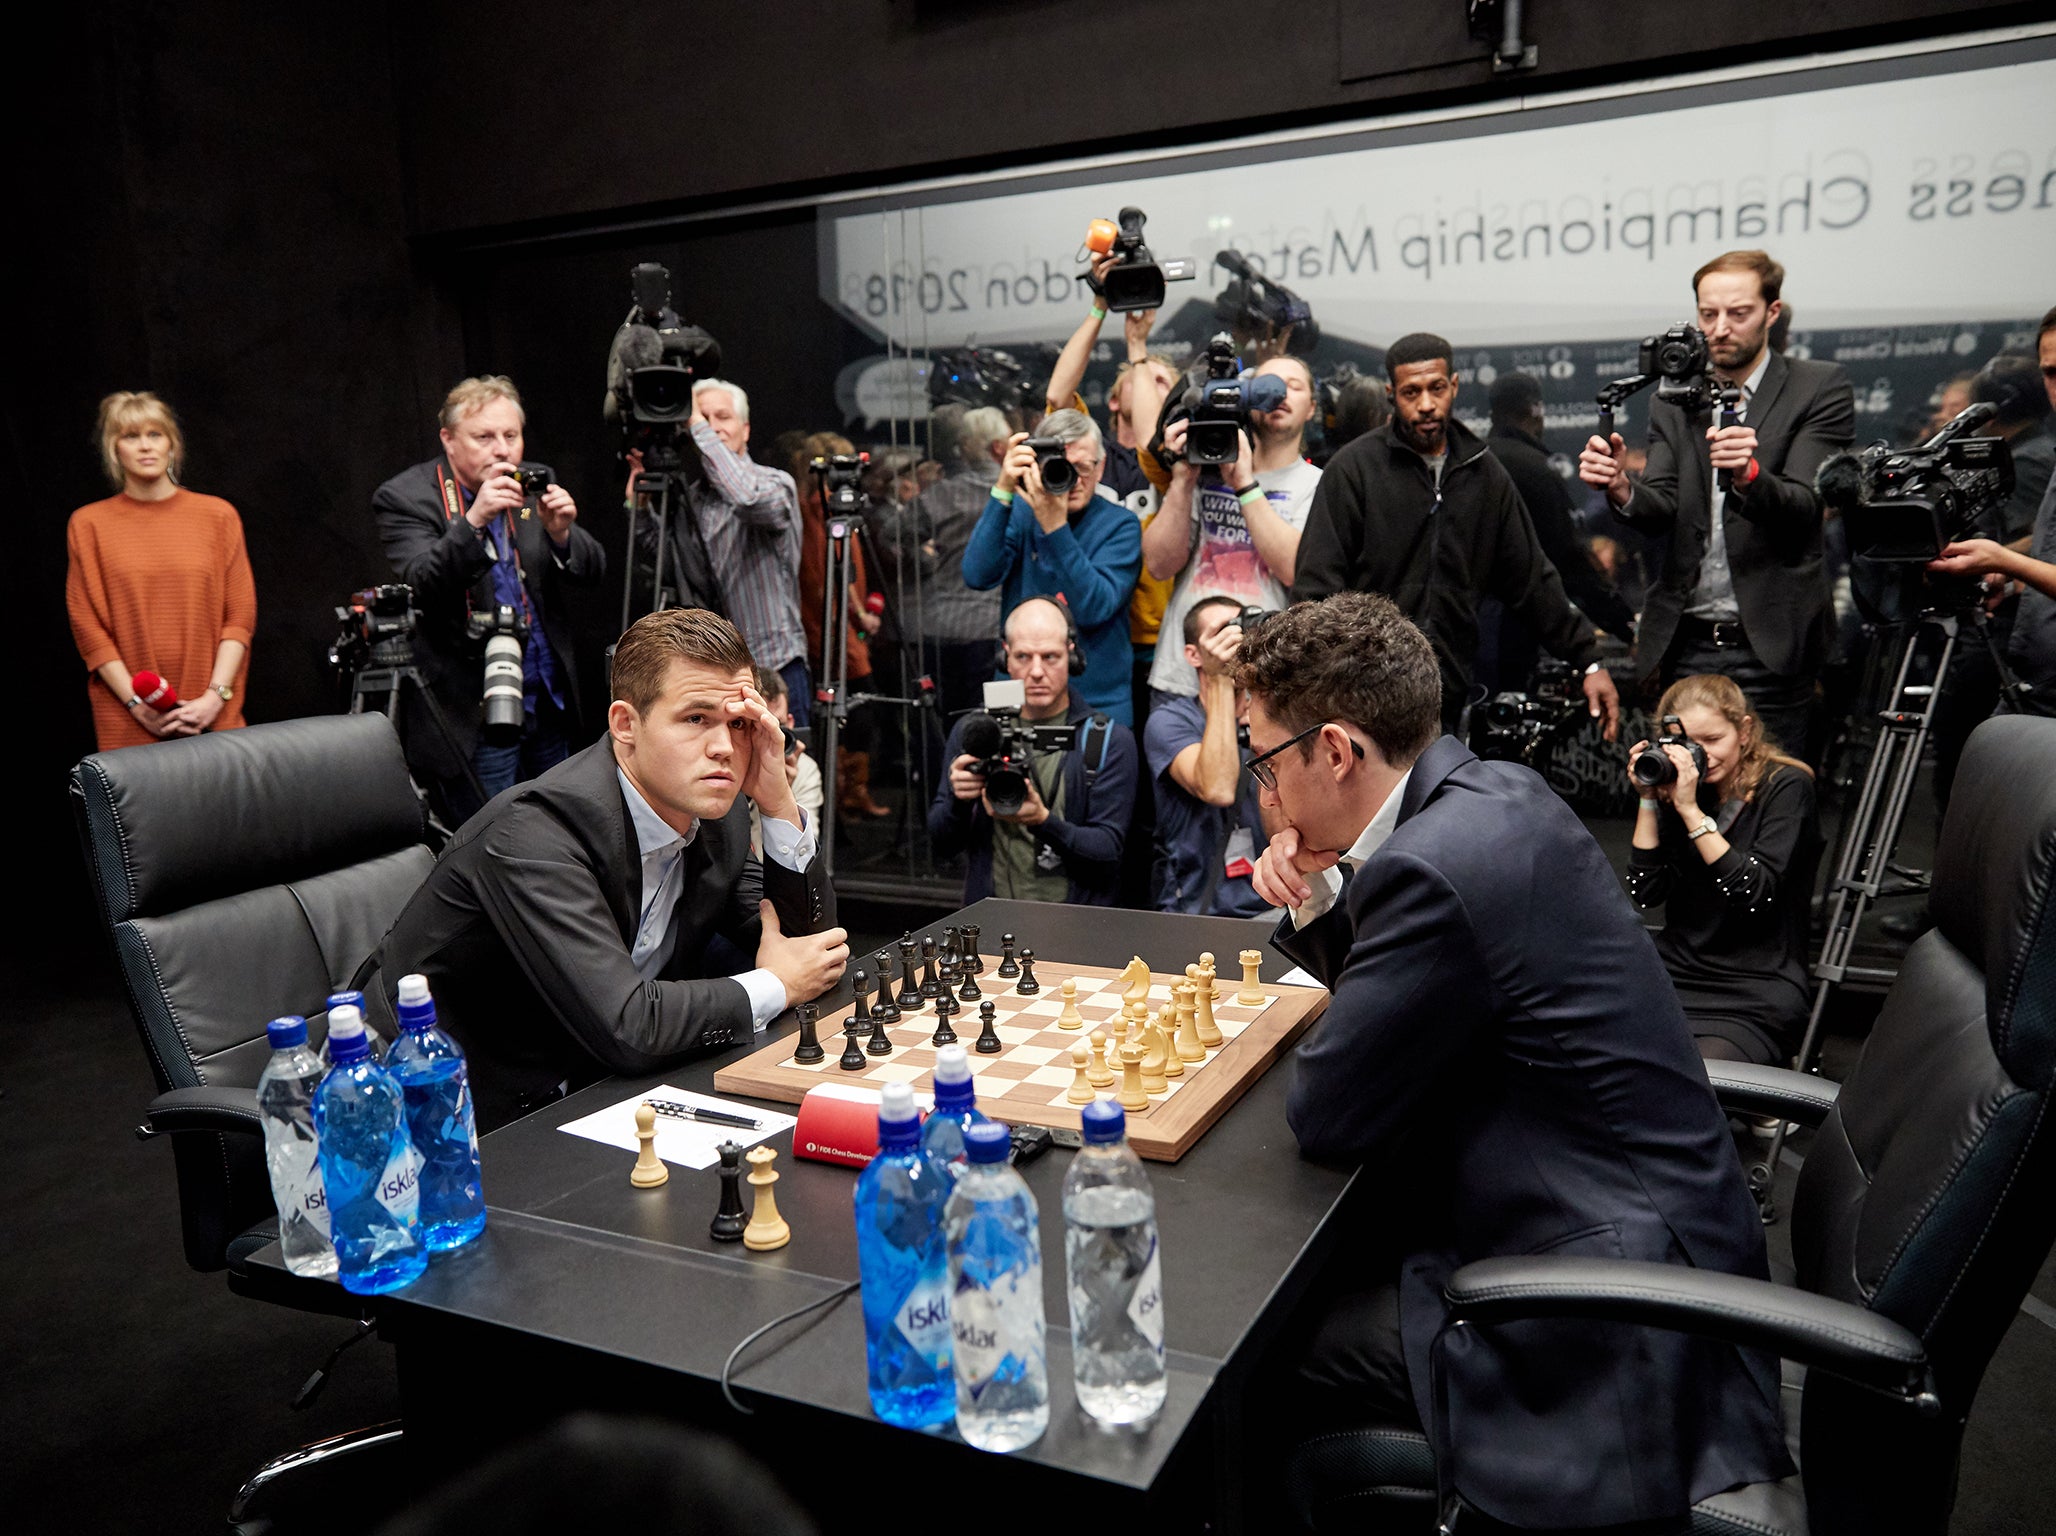 Behind unidirectional glass, Magnus Carlsen & Fabiano Caruana do battle at  the World Chess Championship, The Independent